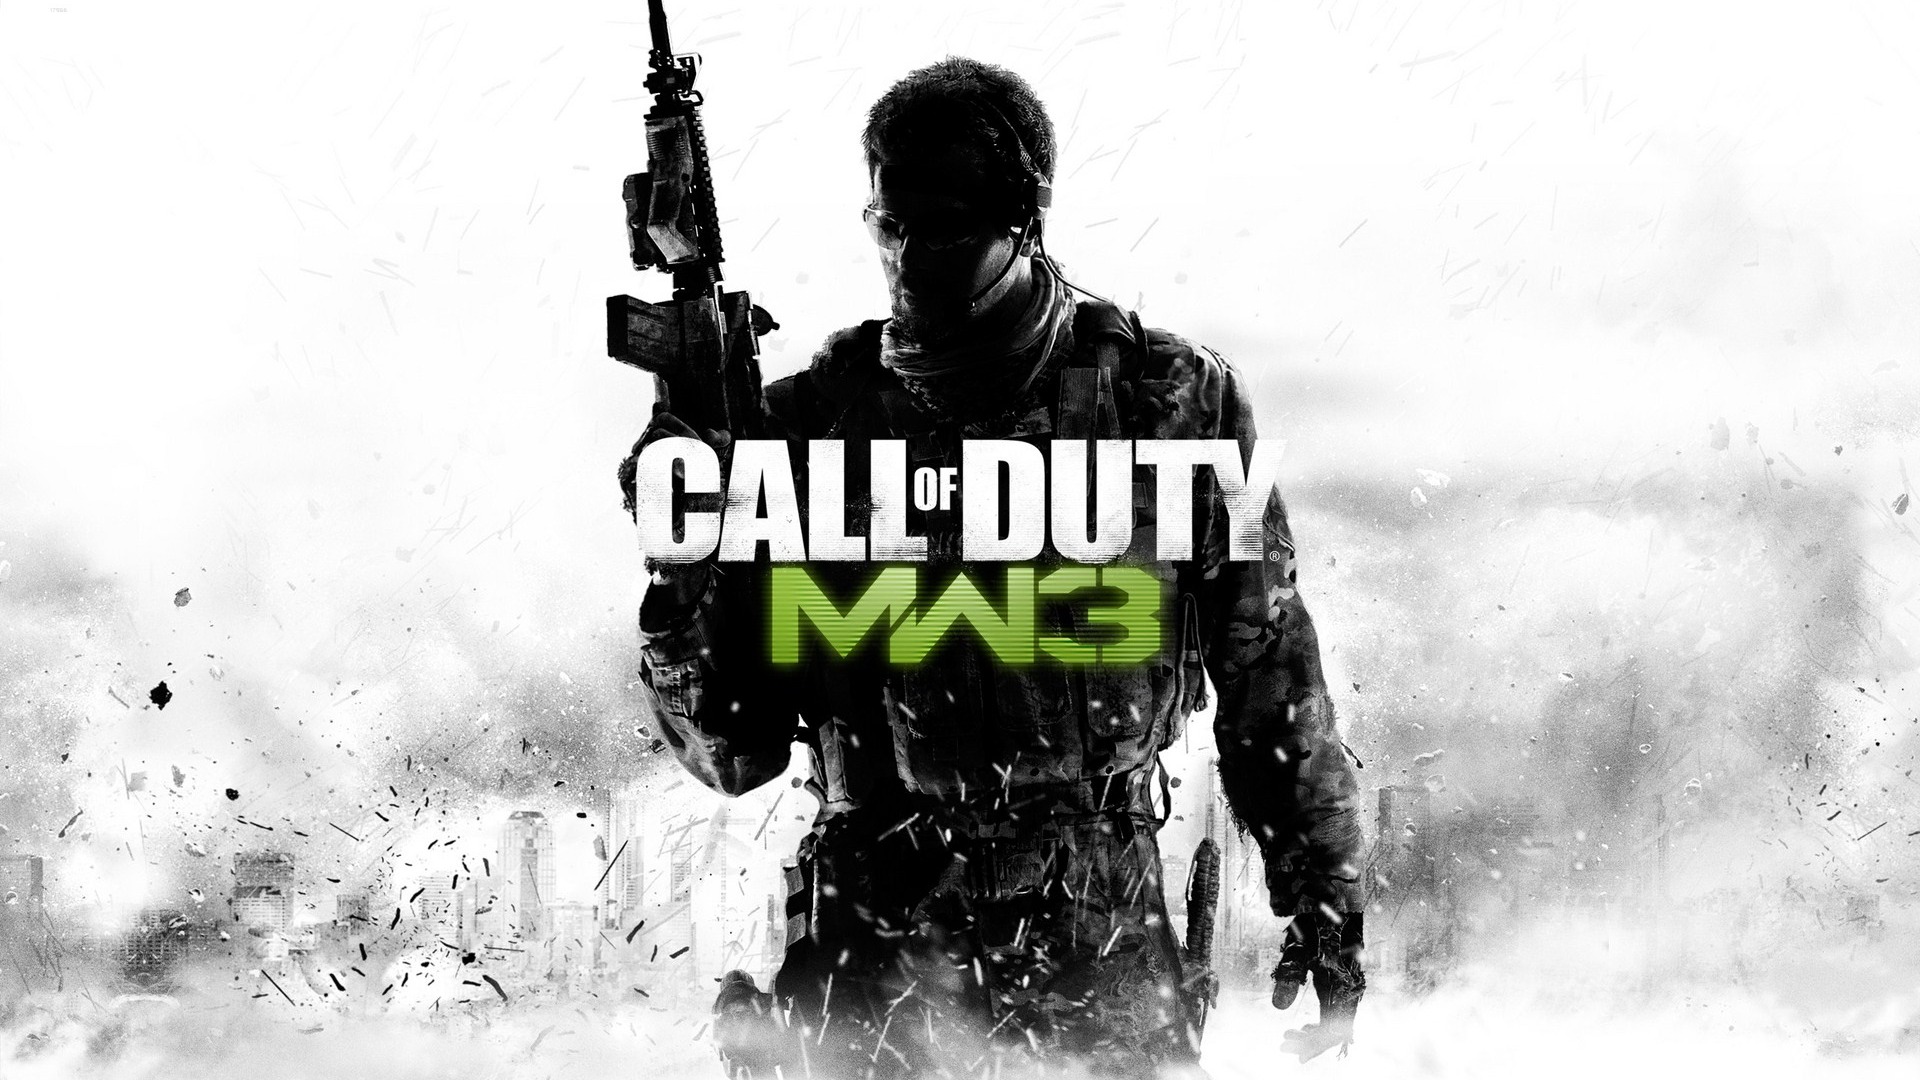 Call of Duty: MW3 HD Wallpapers #6 - 1920x1080